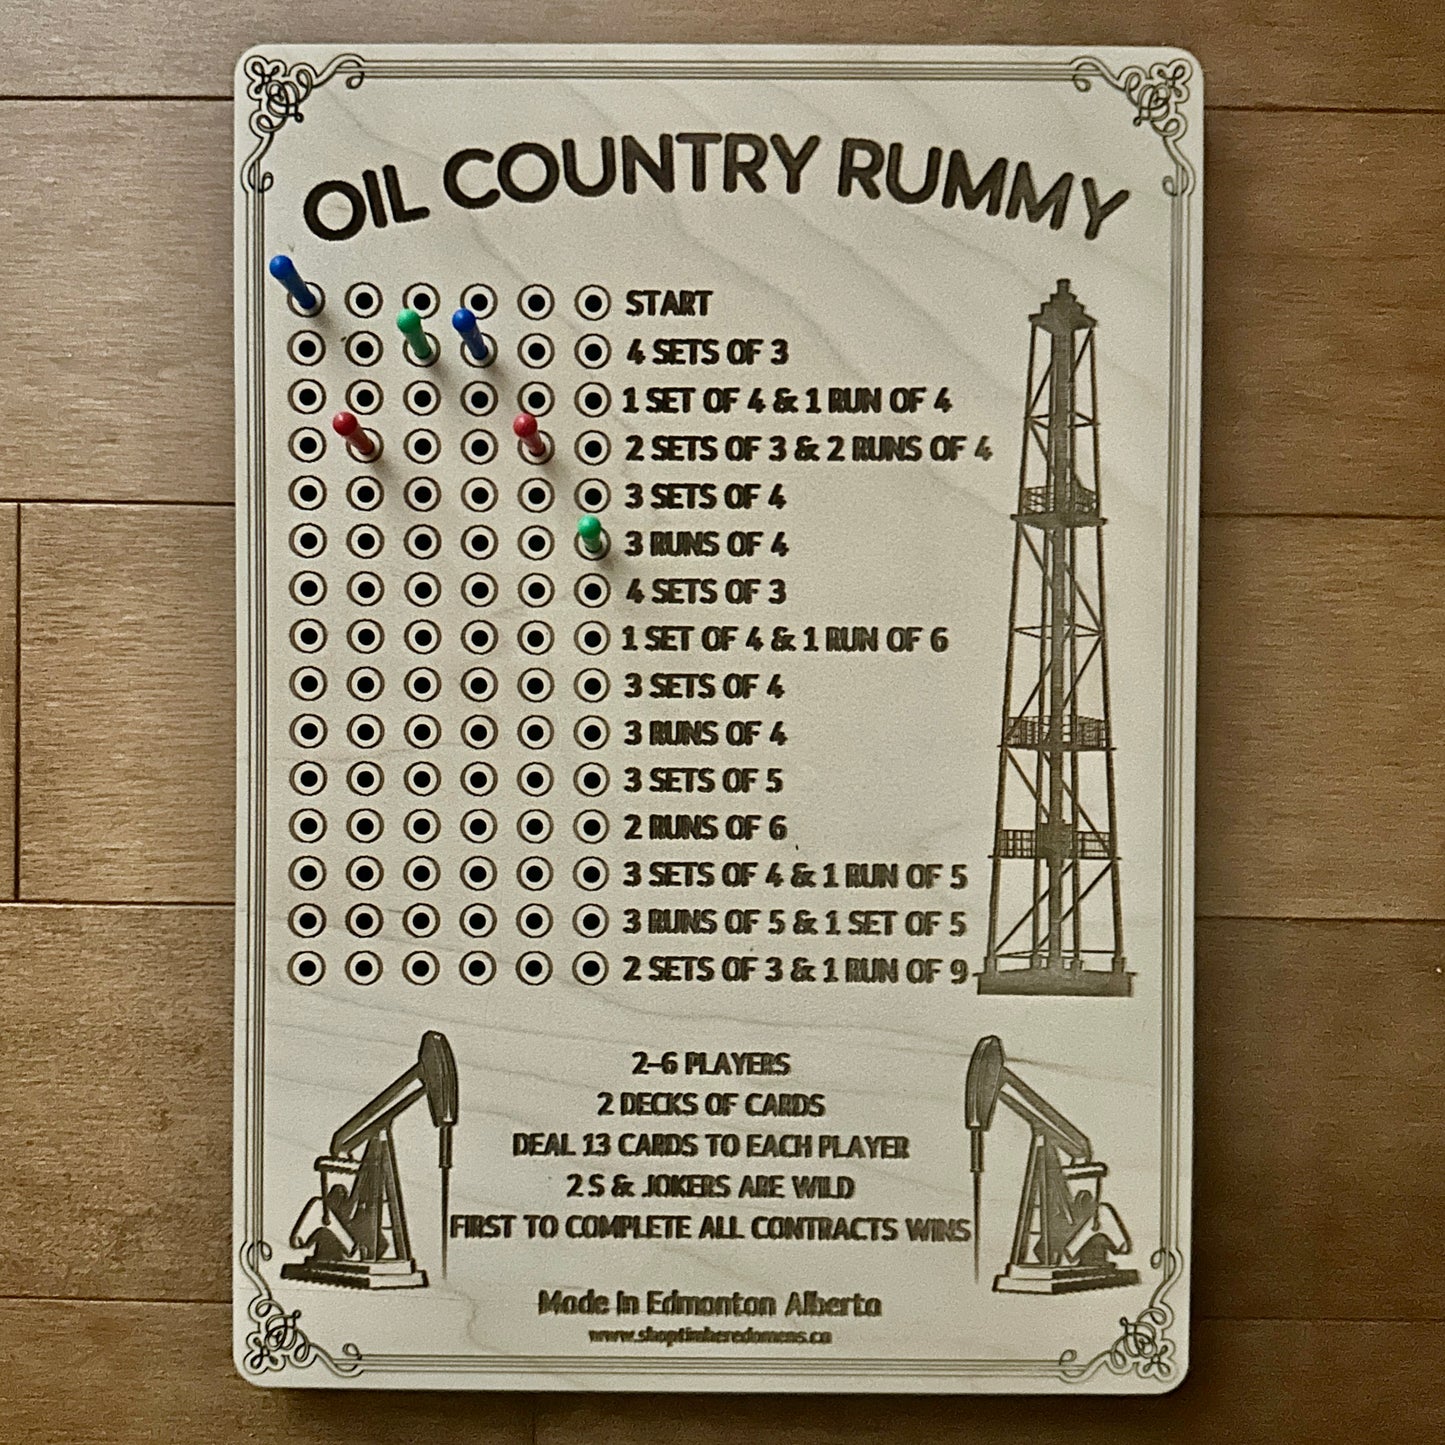 Oil Country Rummy